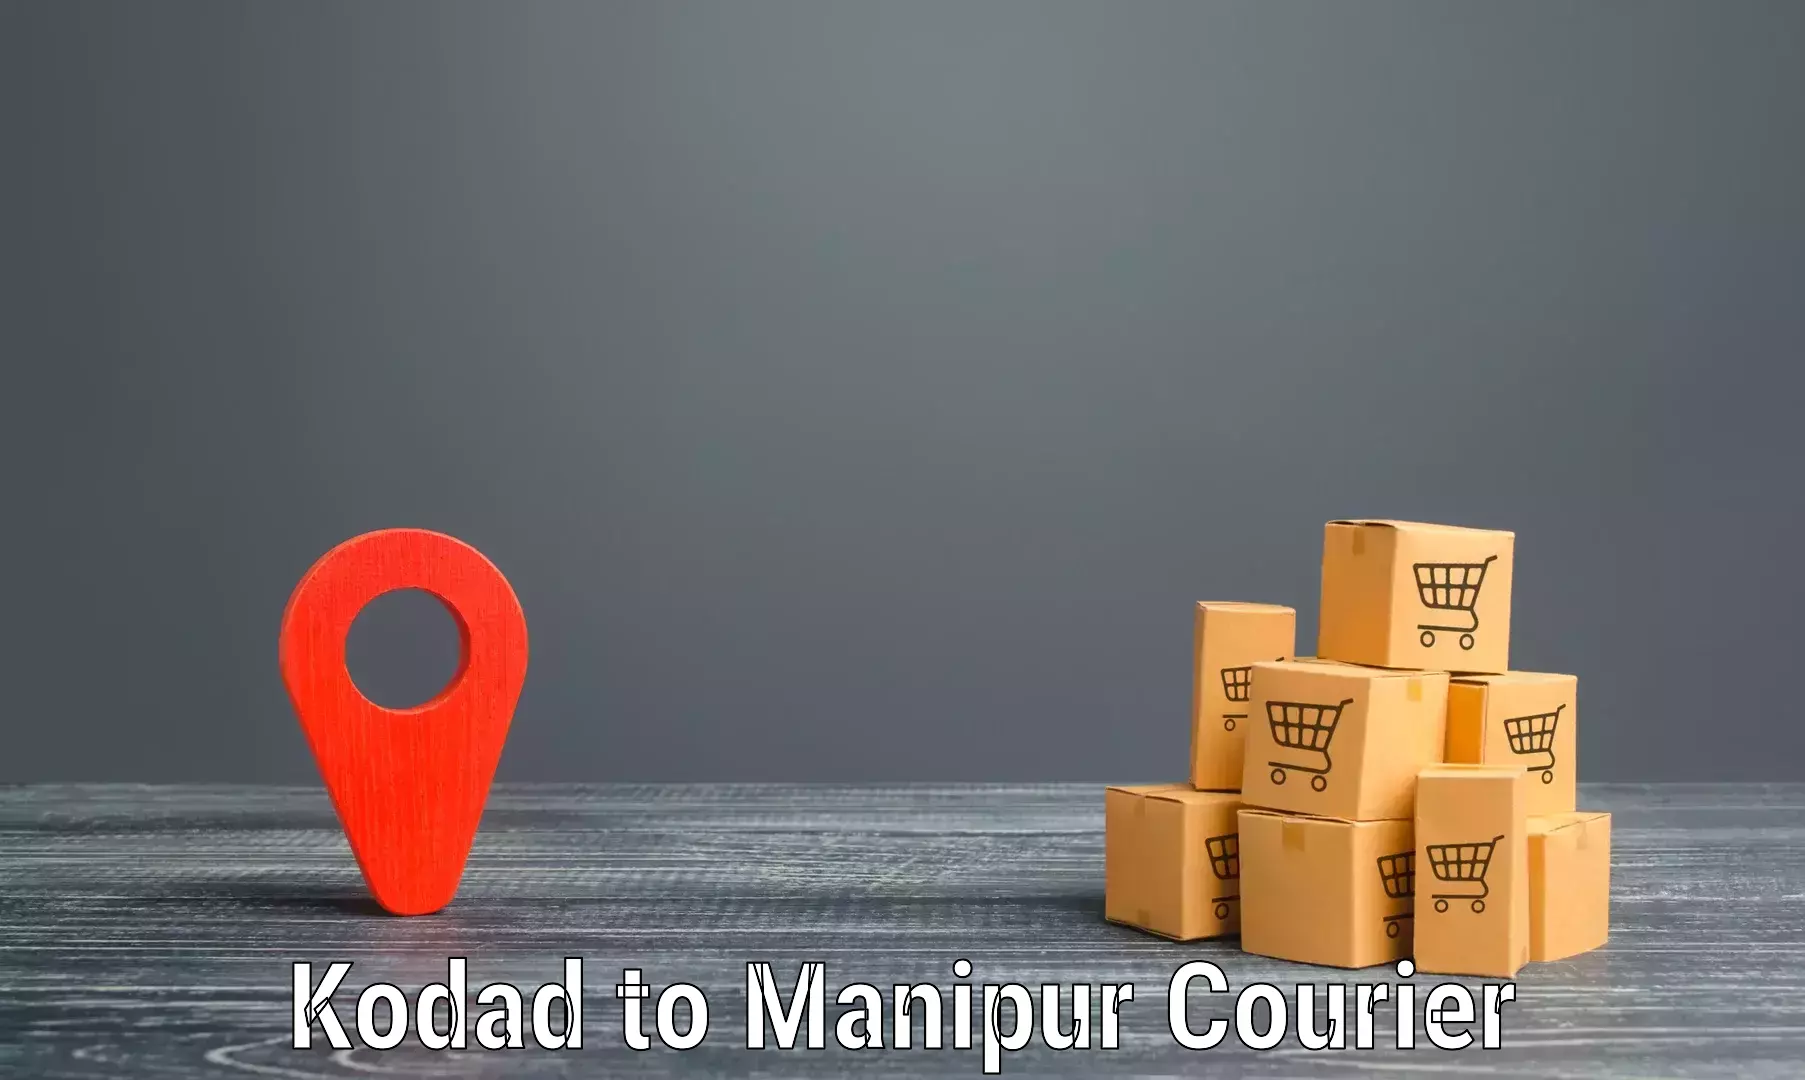 Express delivery network Kodad to Manipur